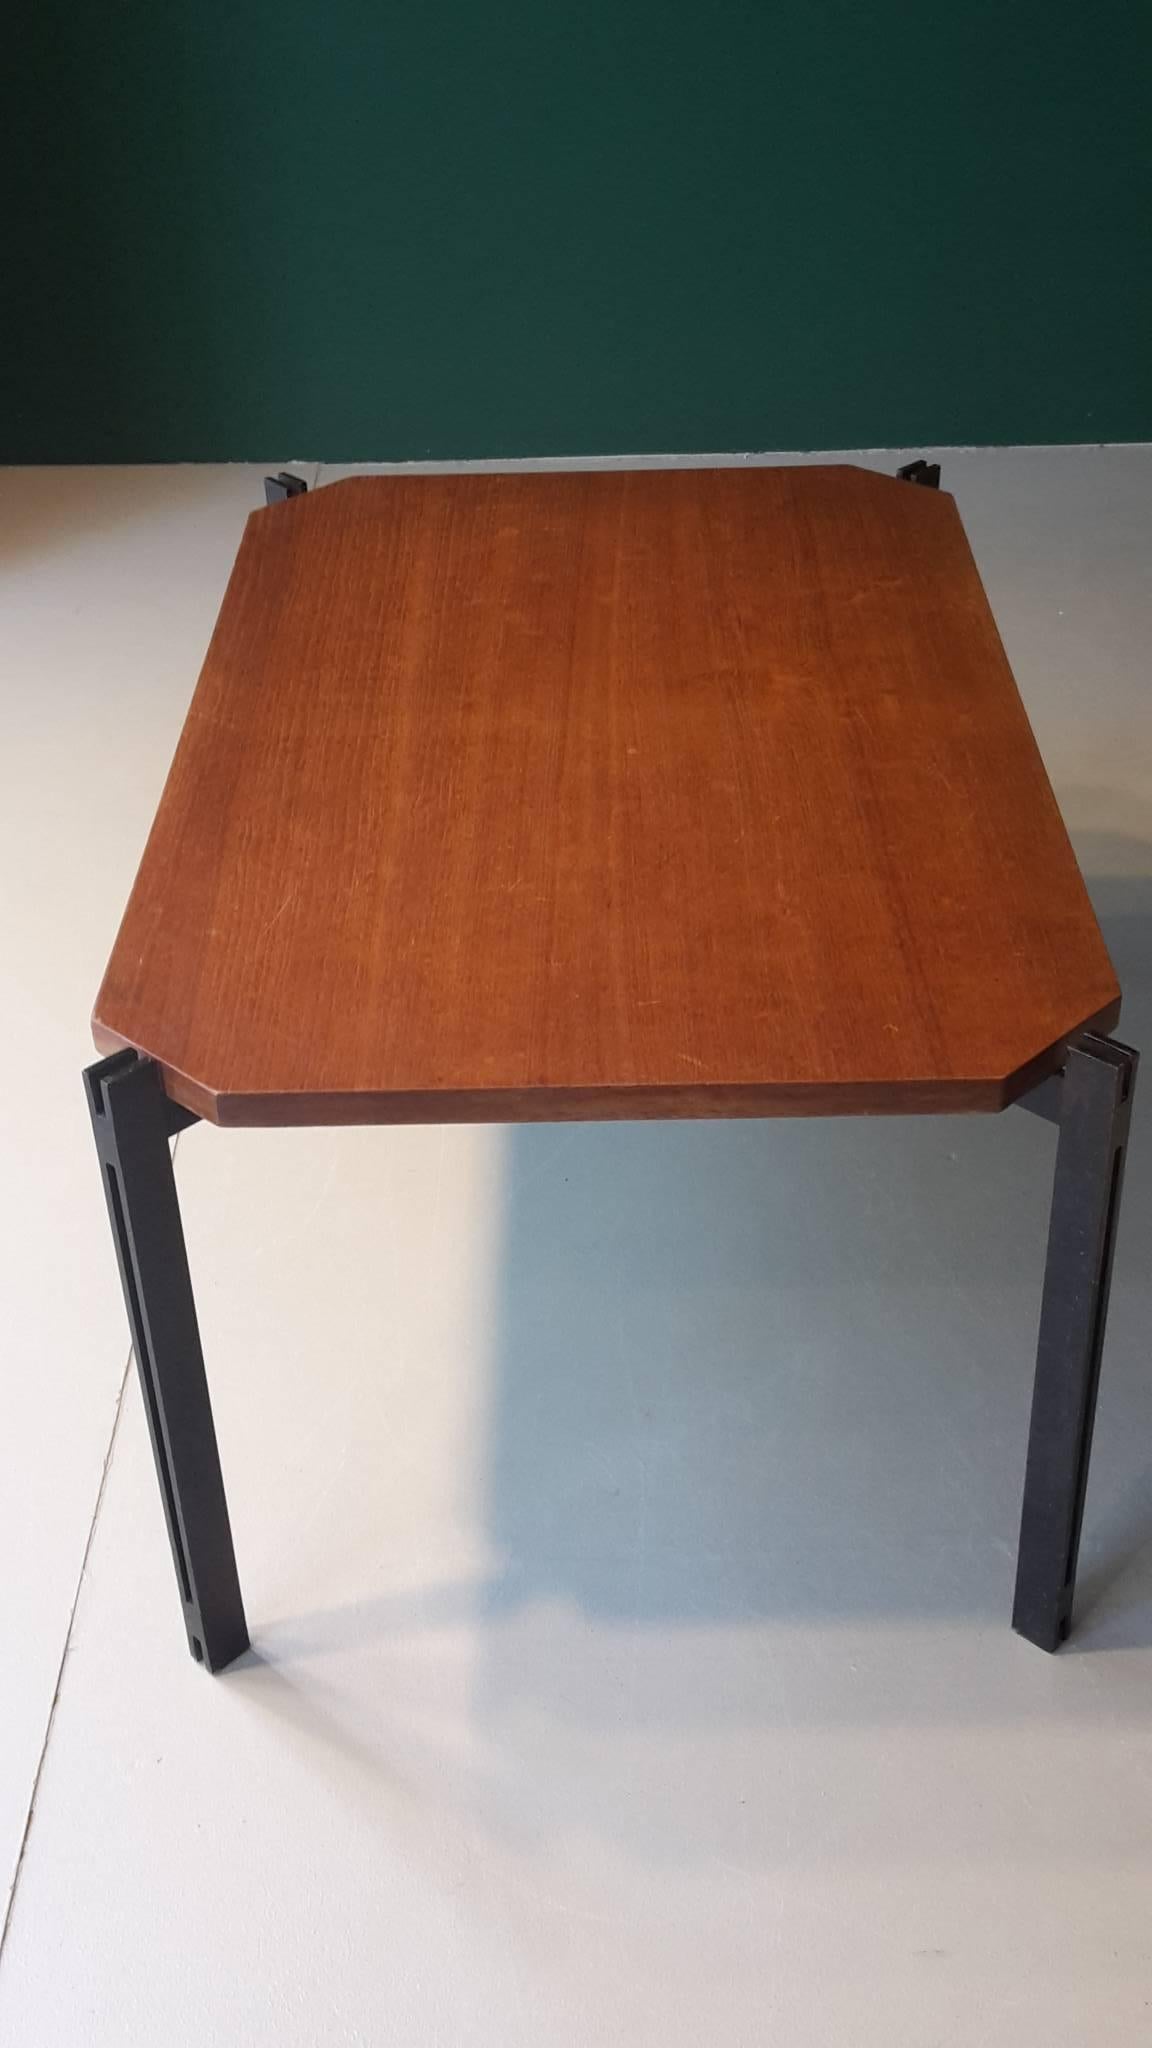 20th Century, Italian Coffee Table Made of Teak and Metal, 1960s For Sale 2